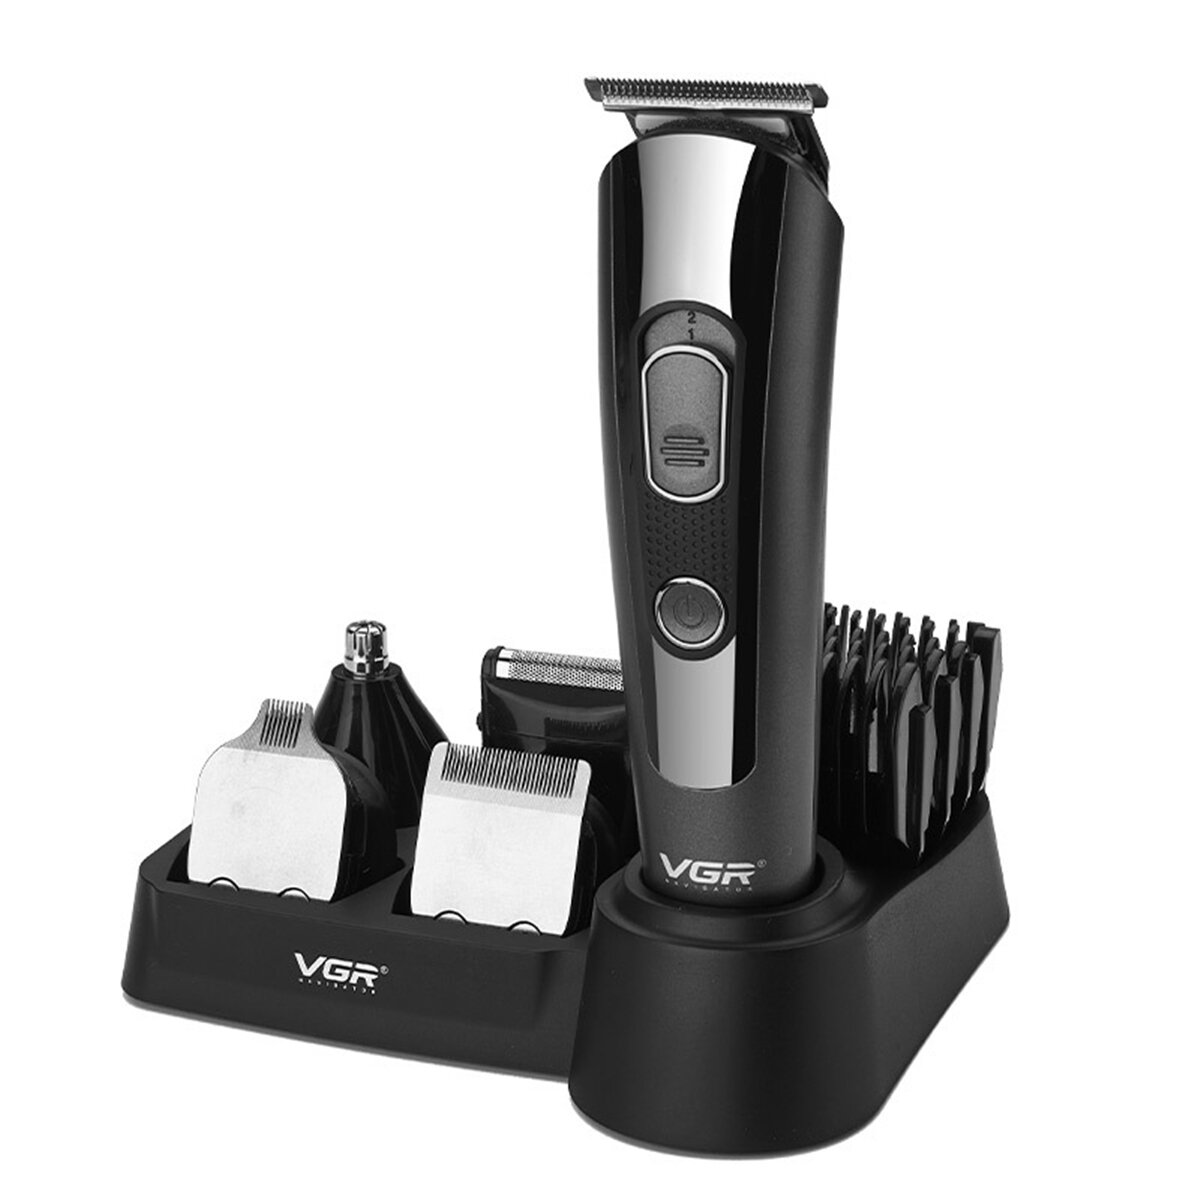 V-175 Professional Hair Clippers Cordless Trimmer Shaving Machine Cutting Barber Beard